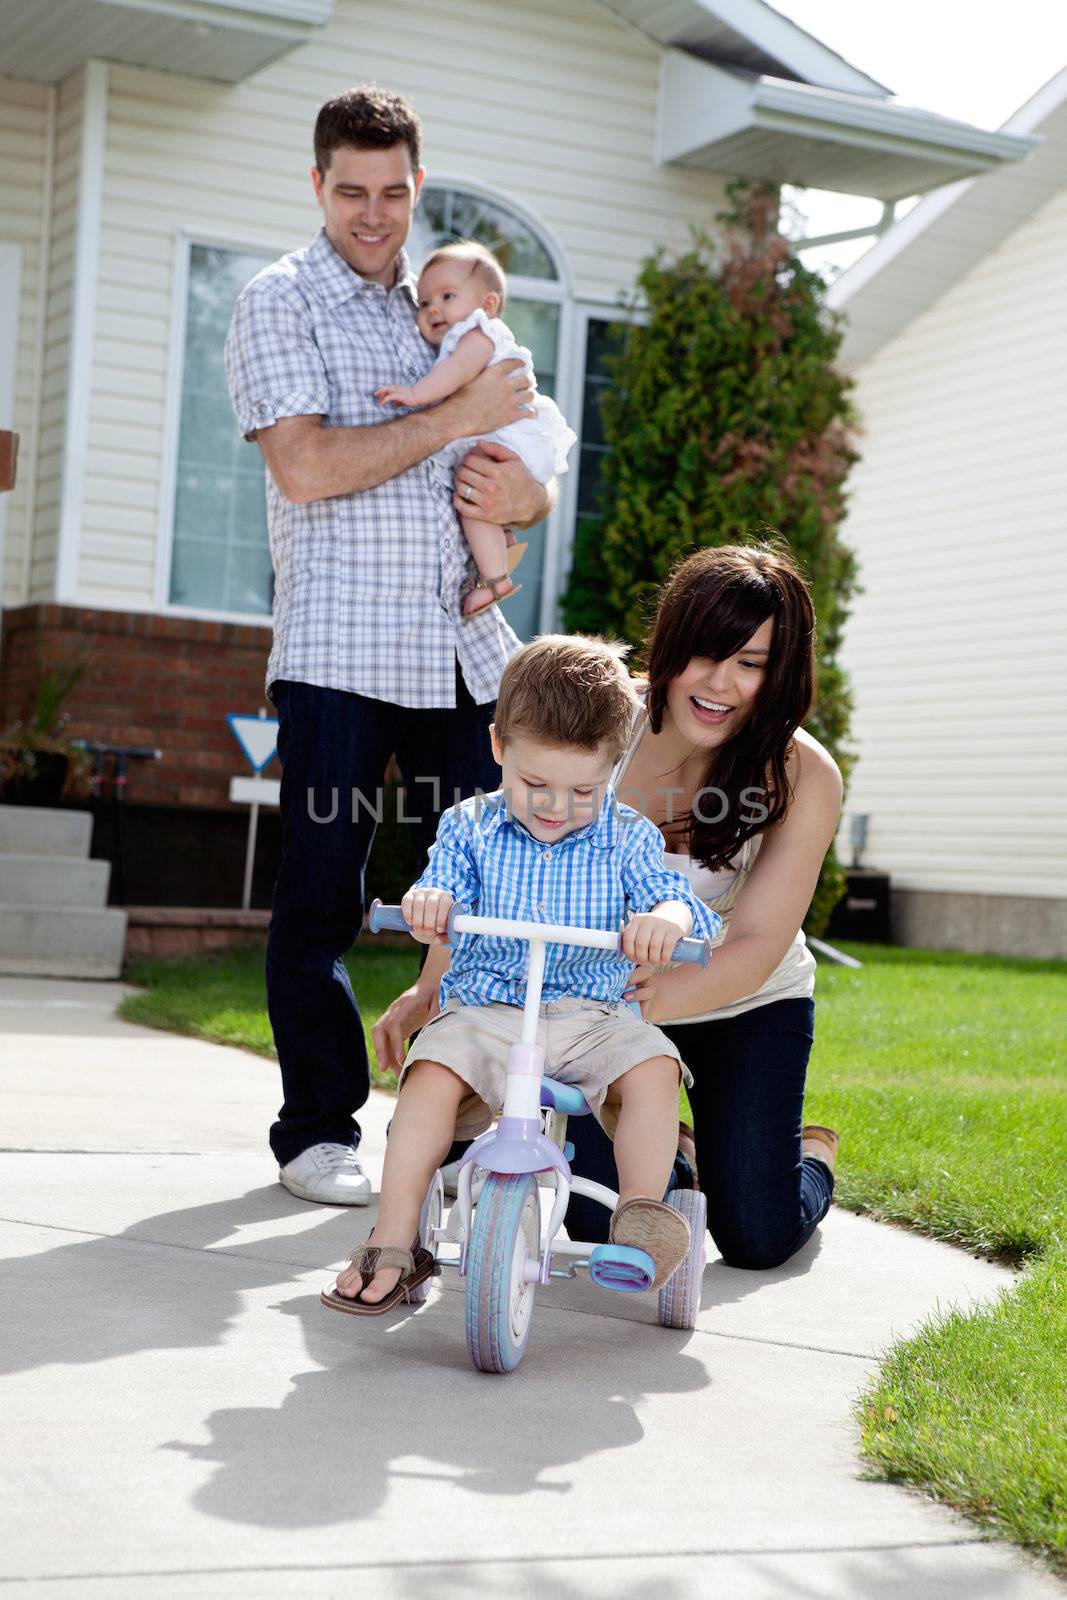 Cheerful mother teaching son to ride tricycle while husband holds daughter in background